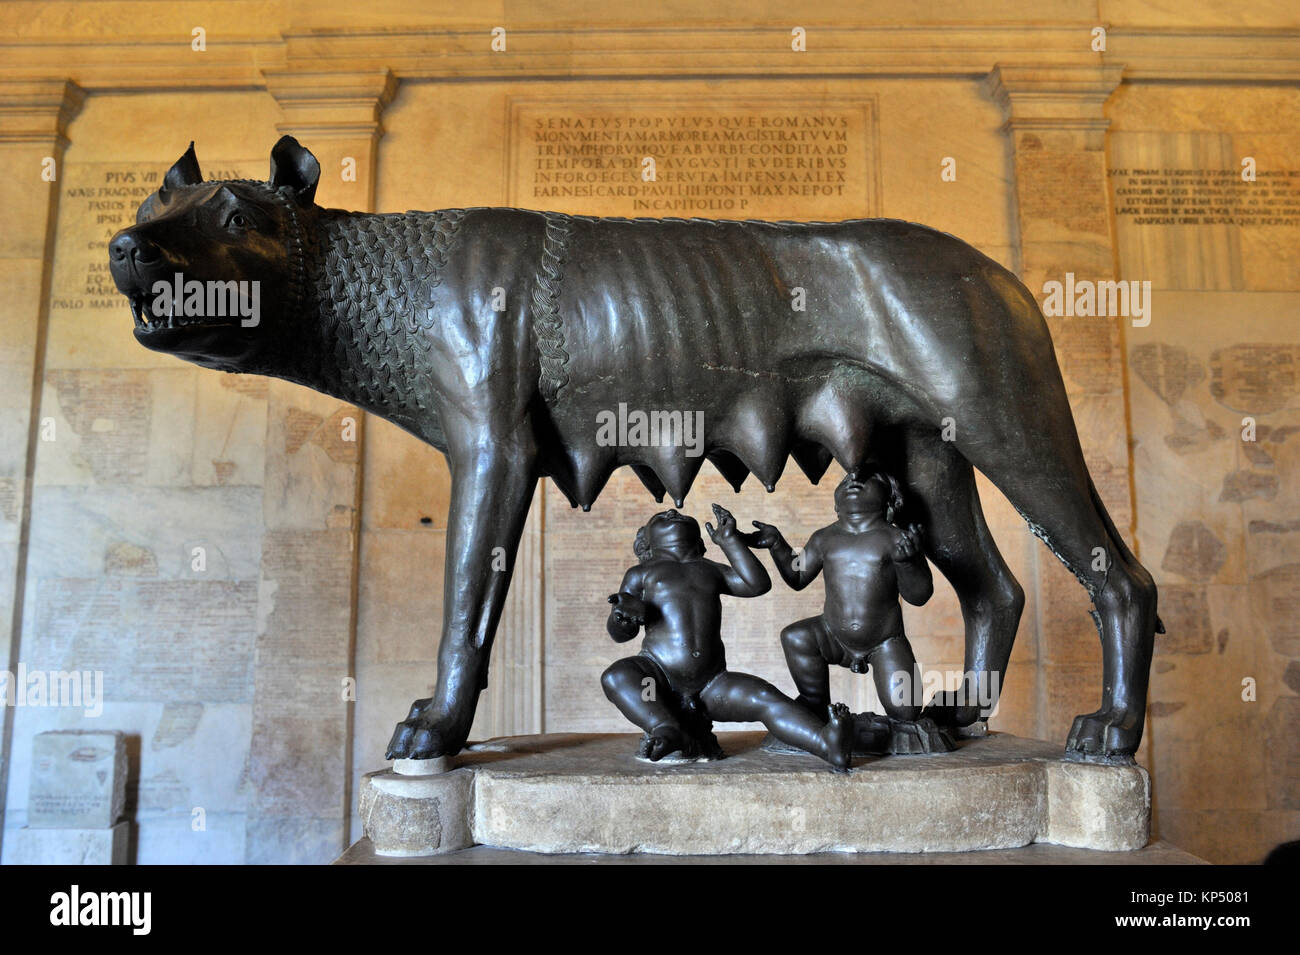 Italy, Rome, Capitoline Museums, Musei Capitolini, Palazzo dei Conservatori, she-wolf with Romulus and Remus, ancient roman bronze sculpture Stock Photo